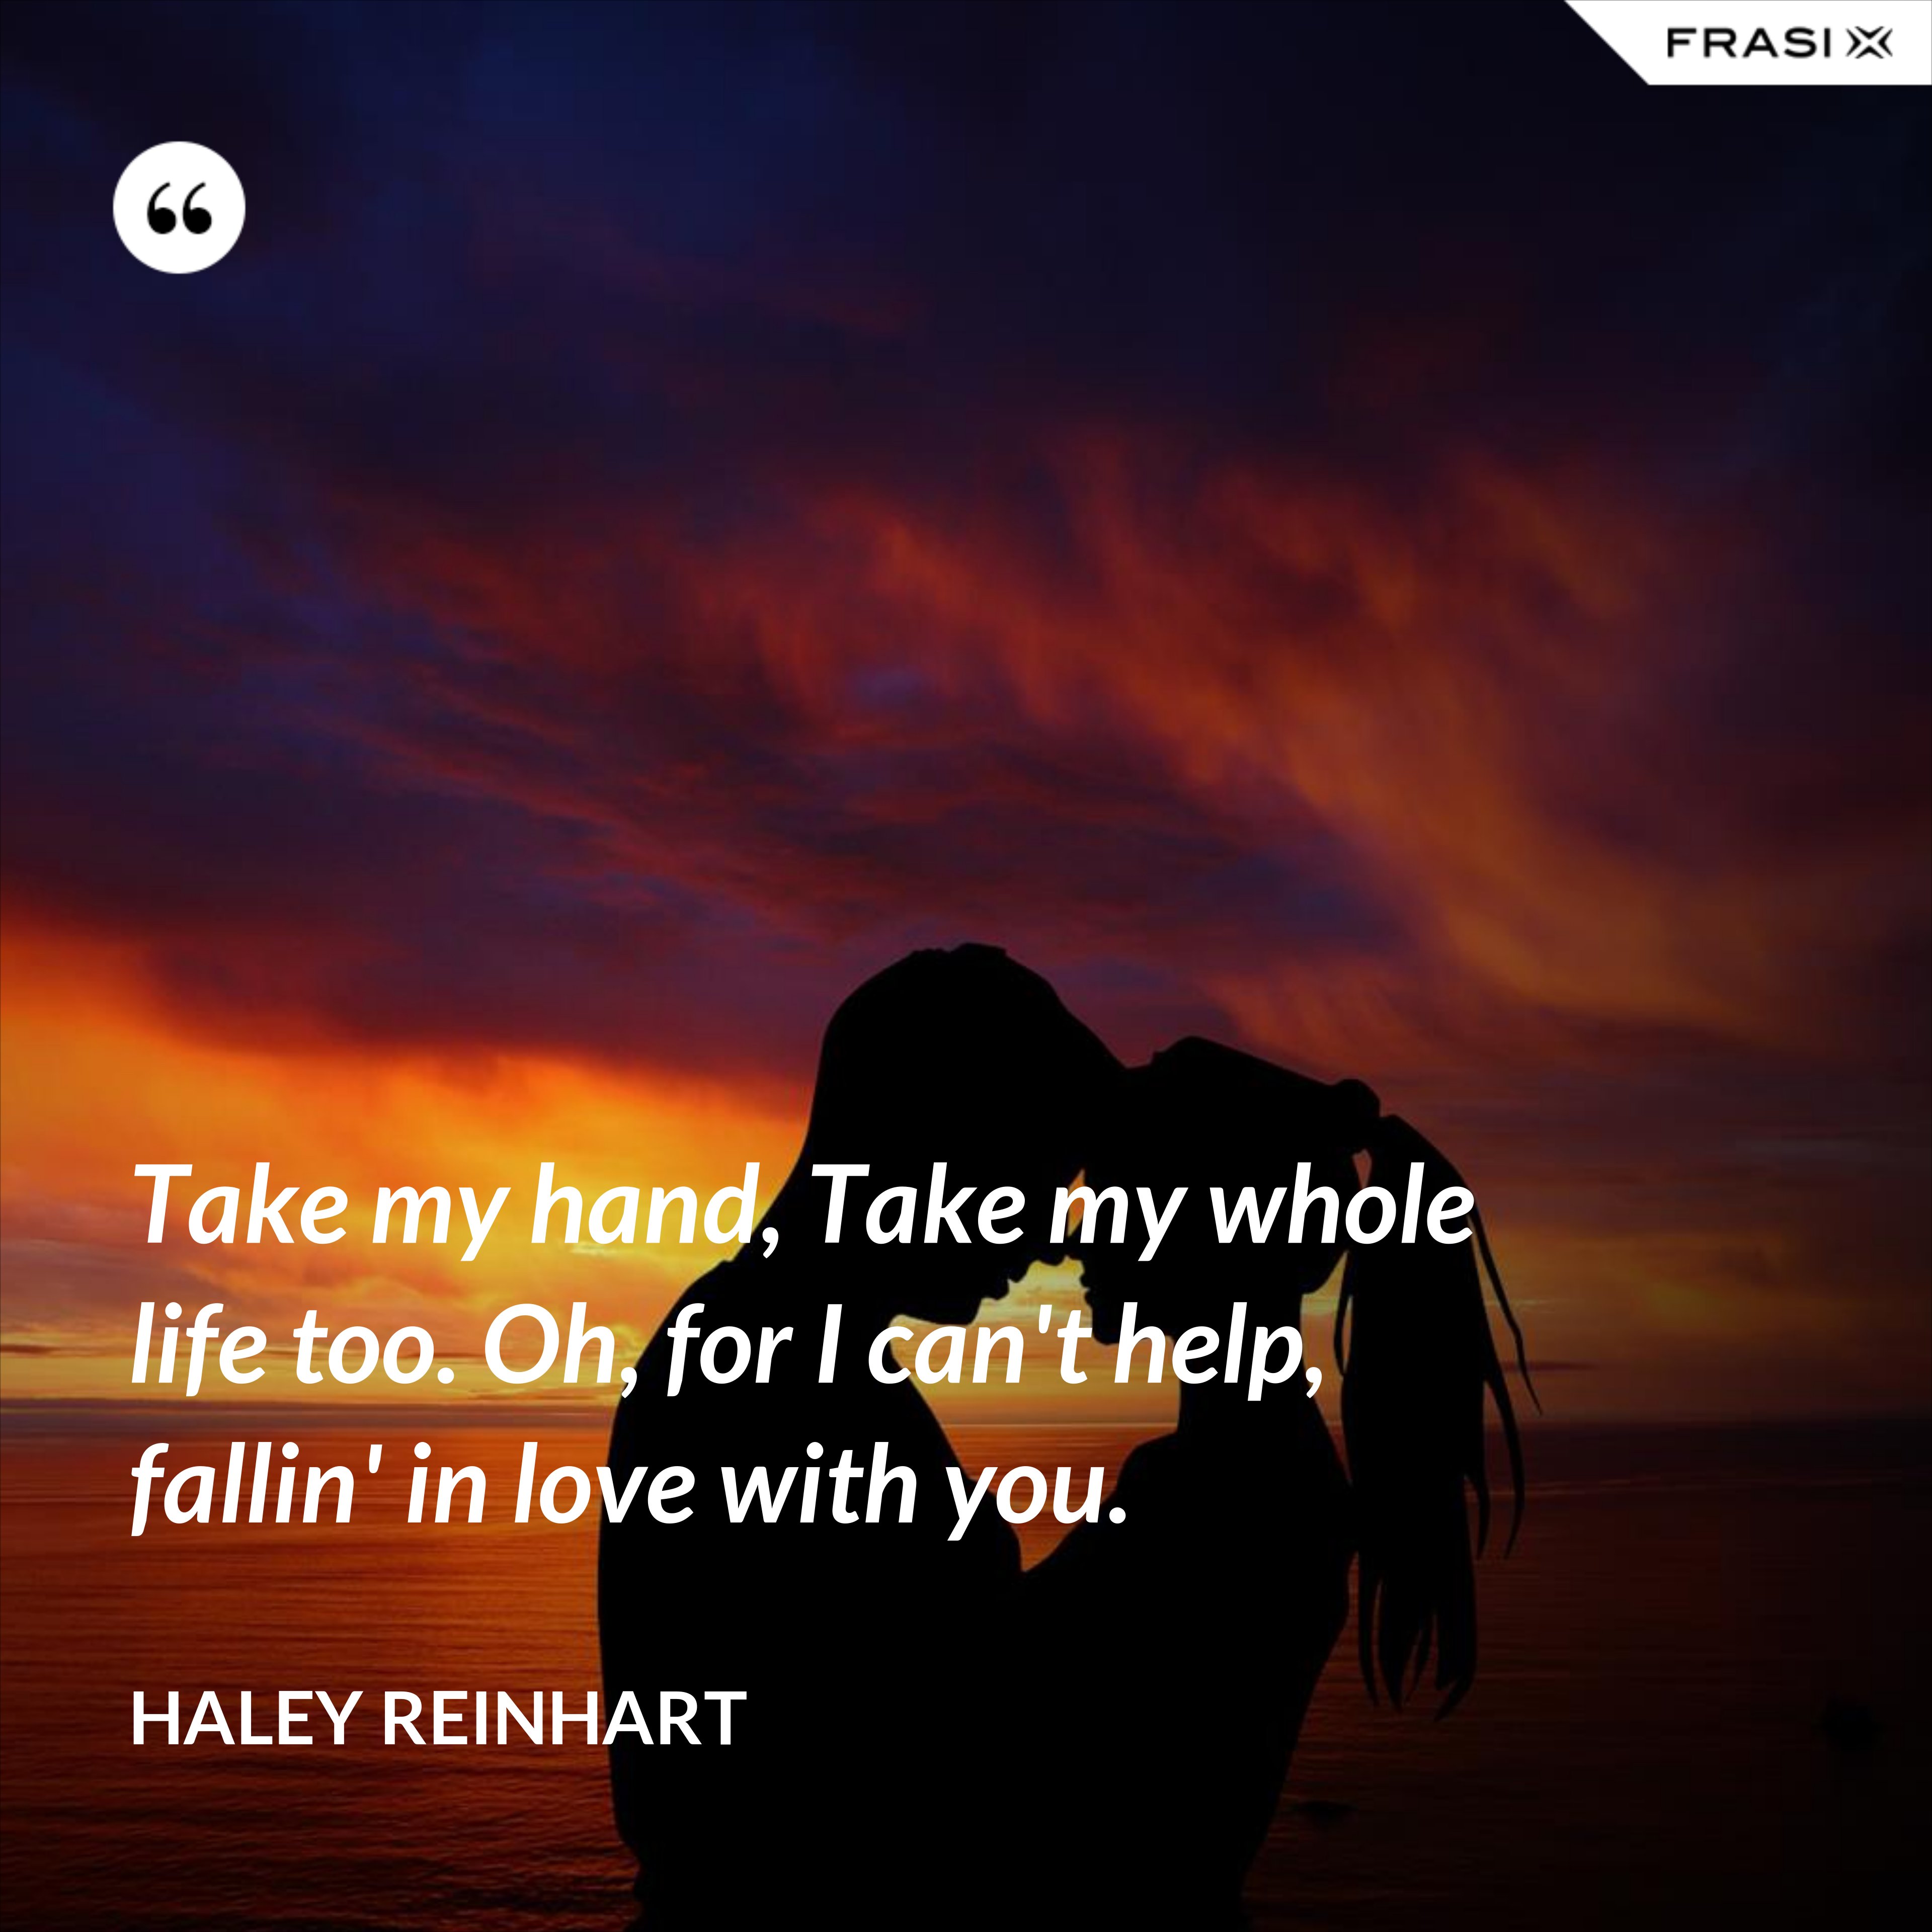 Take my hand, Take my whole life too. Oh, for I can't help, fallin' in love with you. - Haley Reinhart